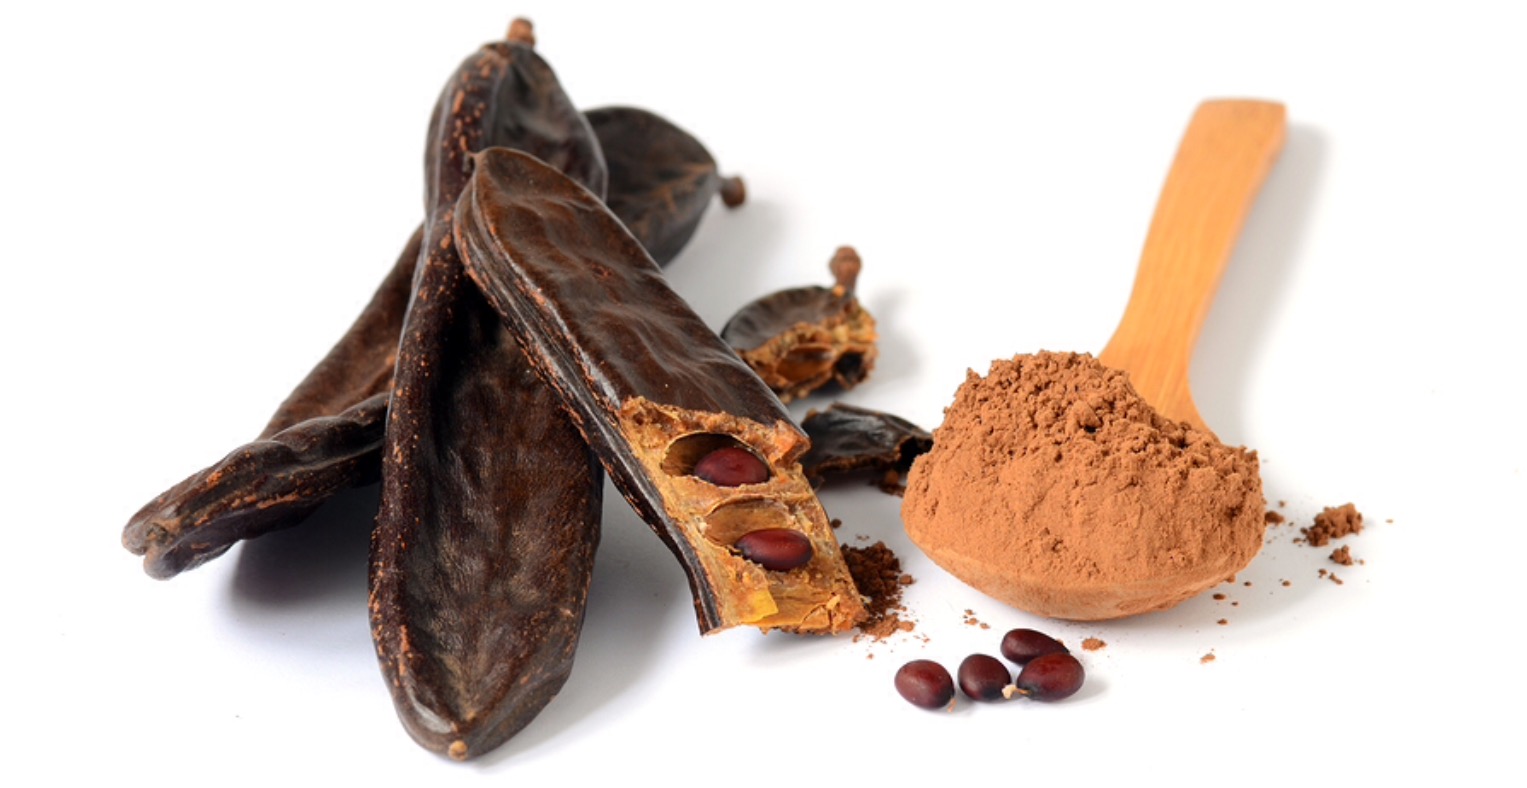 Adventists forced to sign 14-page compliance document professing love for carob